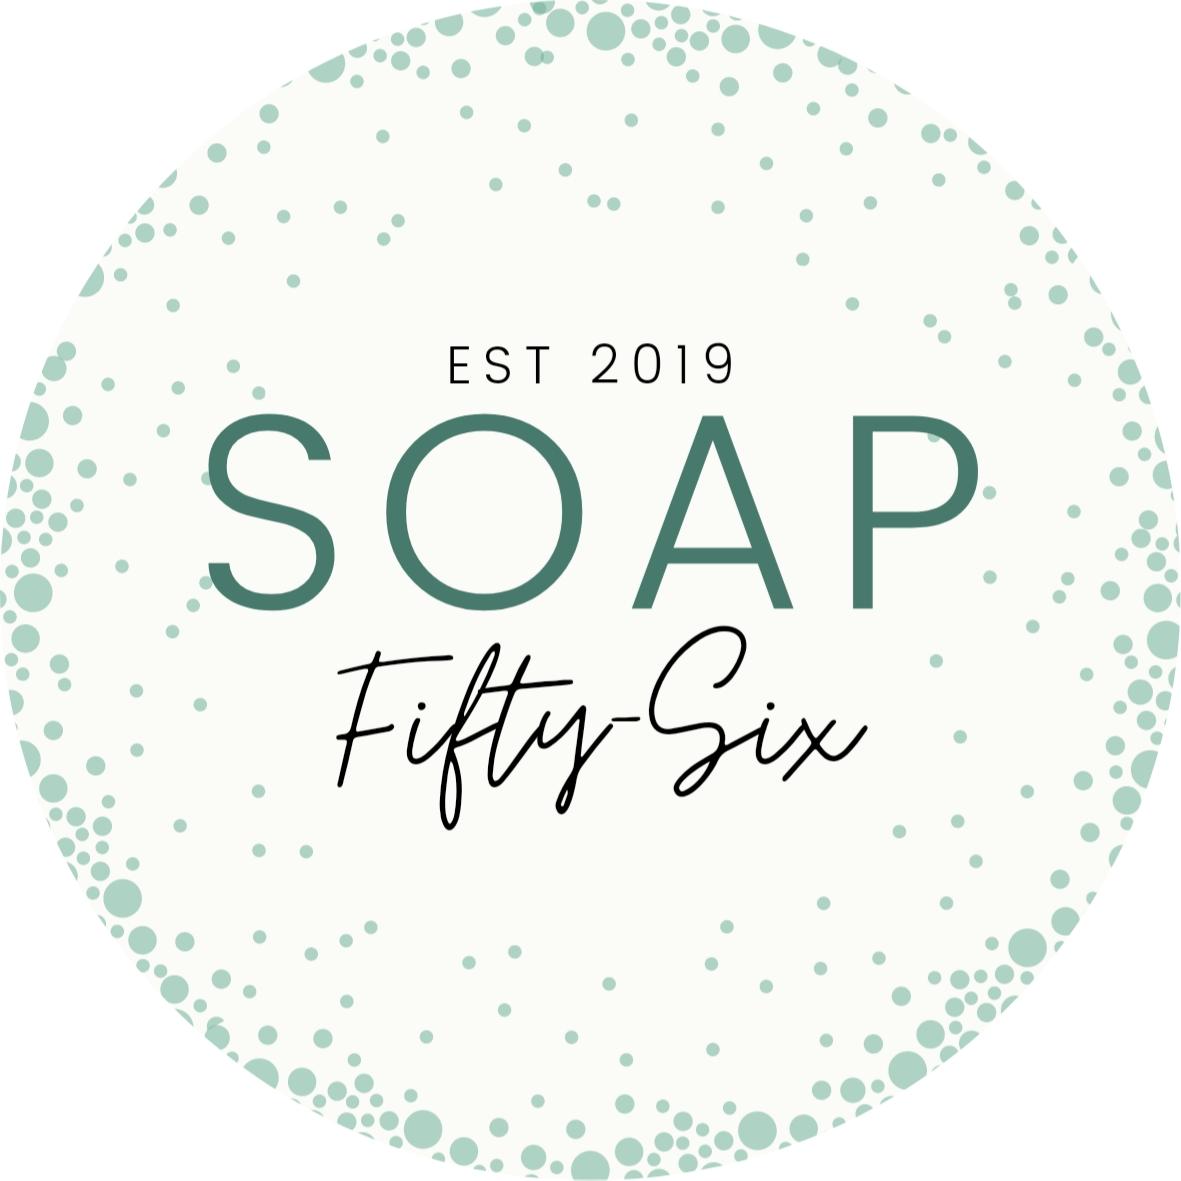 SOAP FIFTY-SIX's images